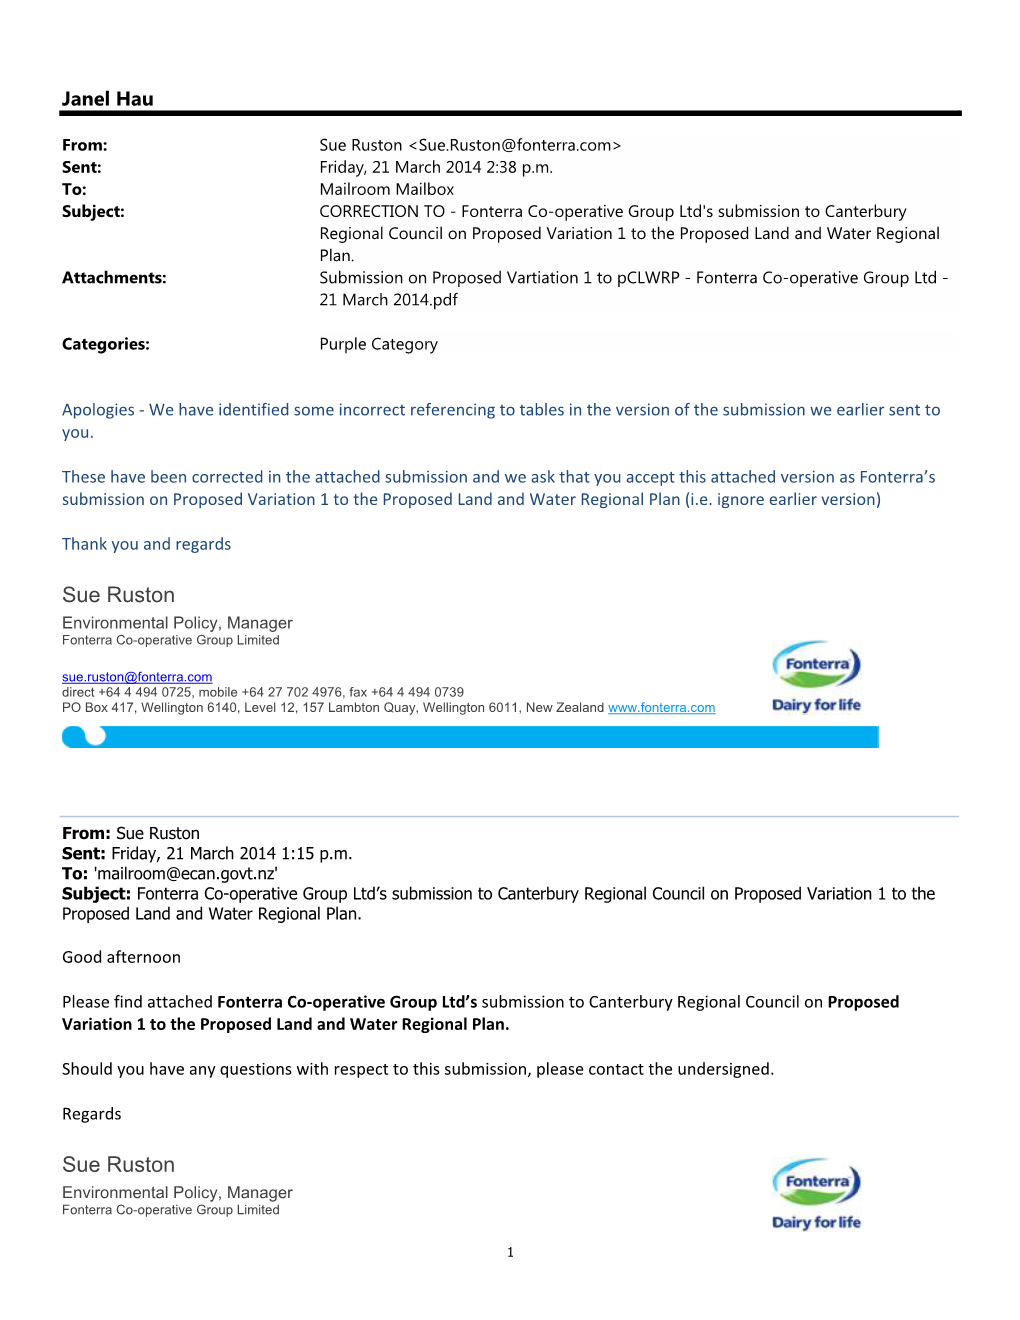 Fonterra Co-Operative Group Ltd's Submission to Canterbury Regional Council on Proposed Variation 1 to the Proposed Land and Water Regional Plan